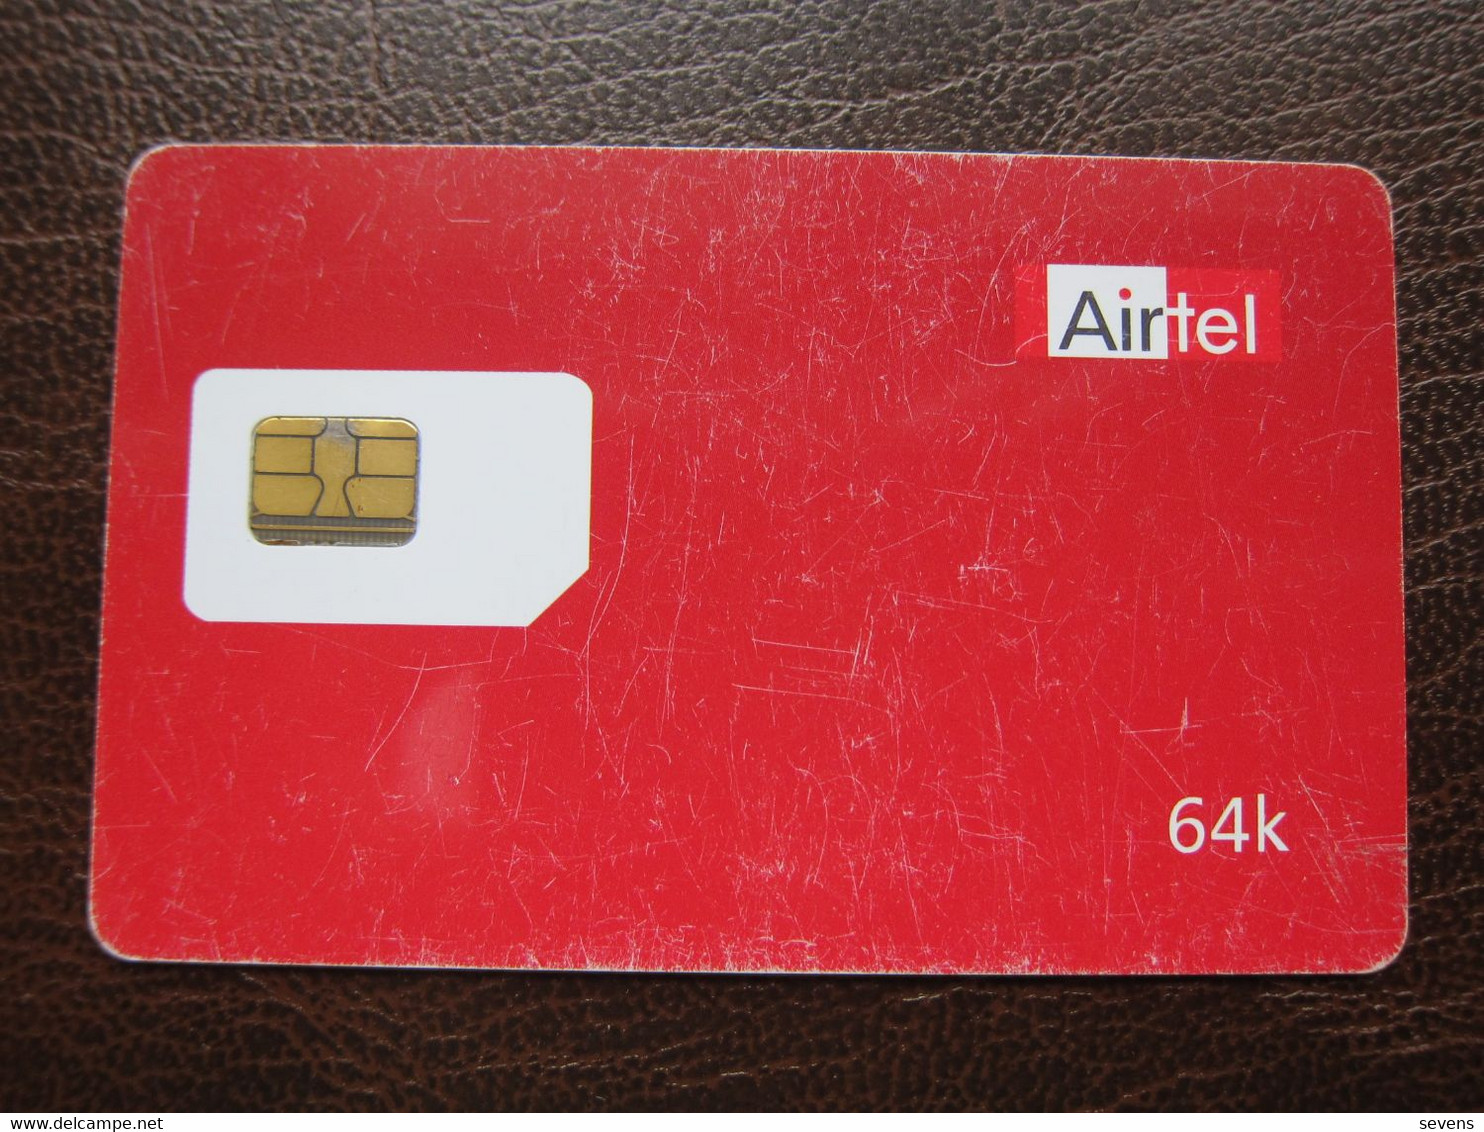 Airtel 64K GSM SIM Card, Sample Card Without Account Number, With Scratchs, Chip Moudle Wrong Cut - Inde